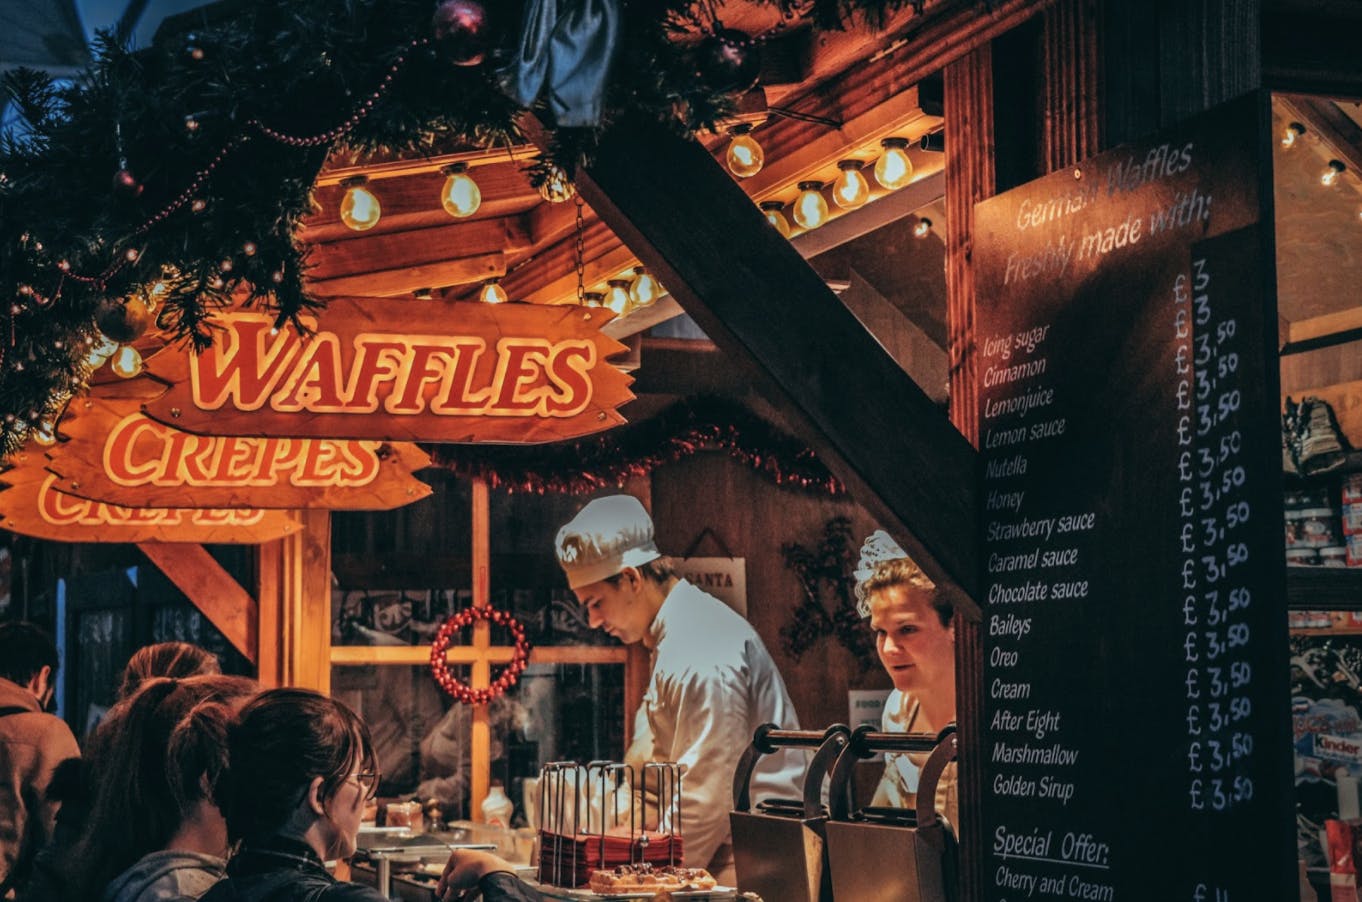 Image of a food stand selling waffles and crepes at a Christmas market